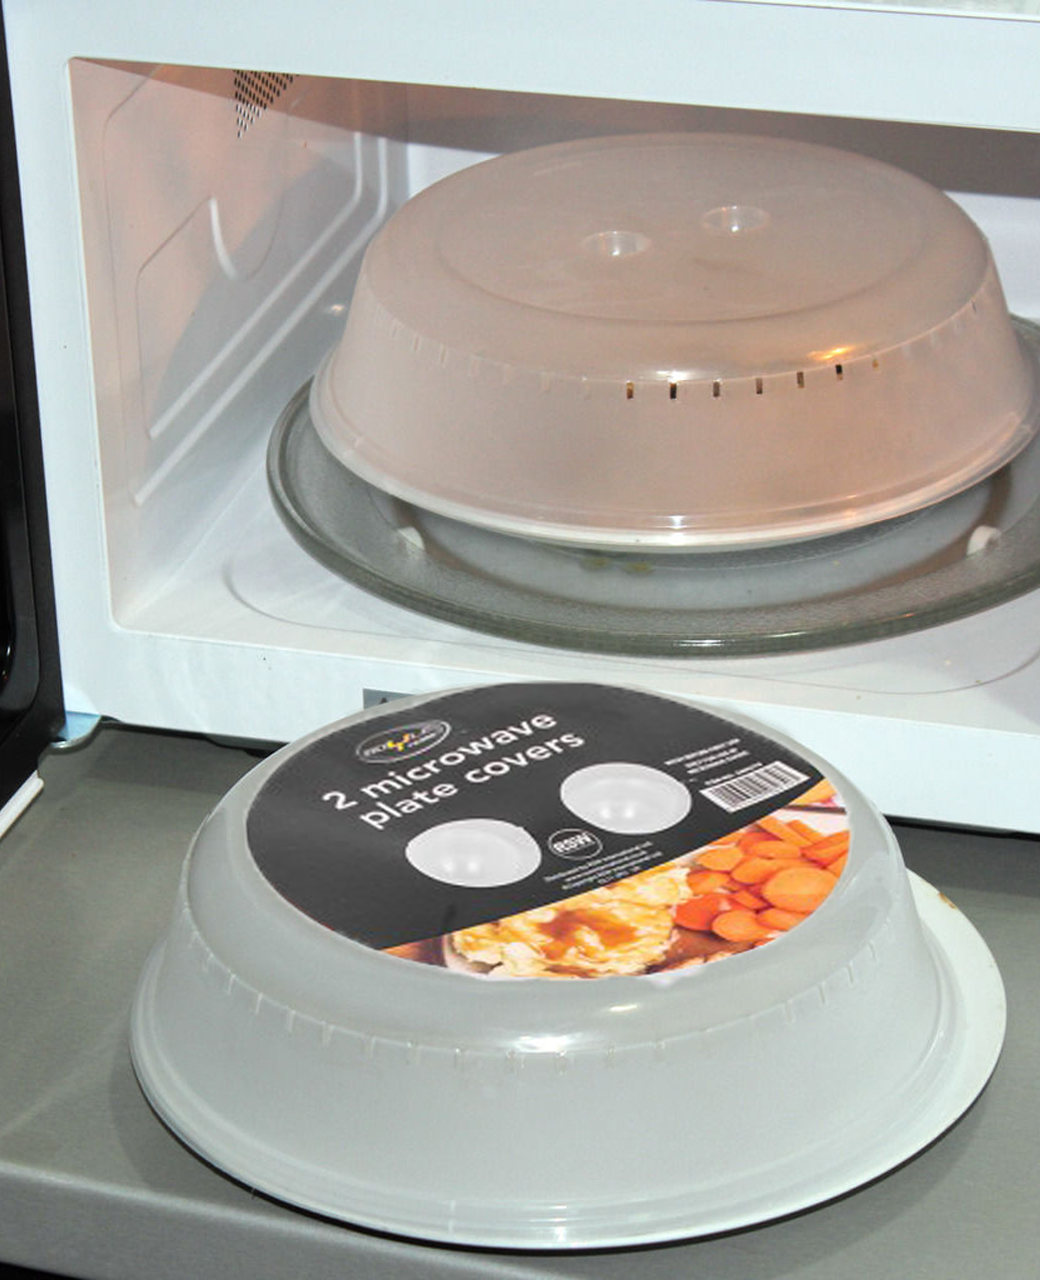 https://www.eadistribution.co.uk/wp-content/uploads/2020/10/Plastic-ventilated-microwave-plate-cover-large-ventilated-microwave-food-plate-dish-cover-plastic-microwave-food-cover-set-of-2-1.jpg